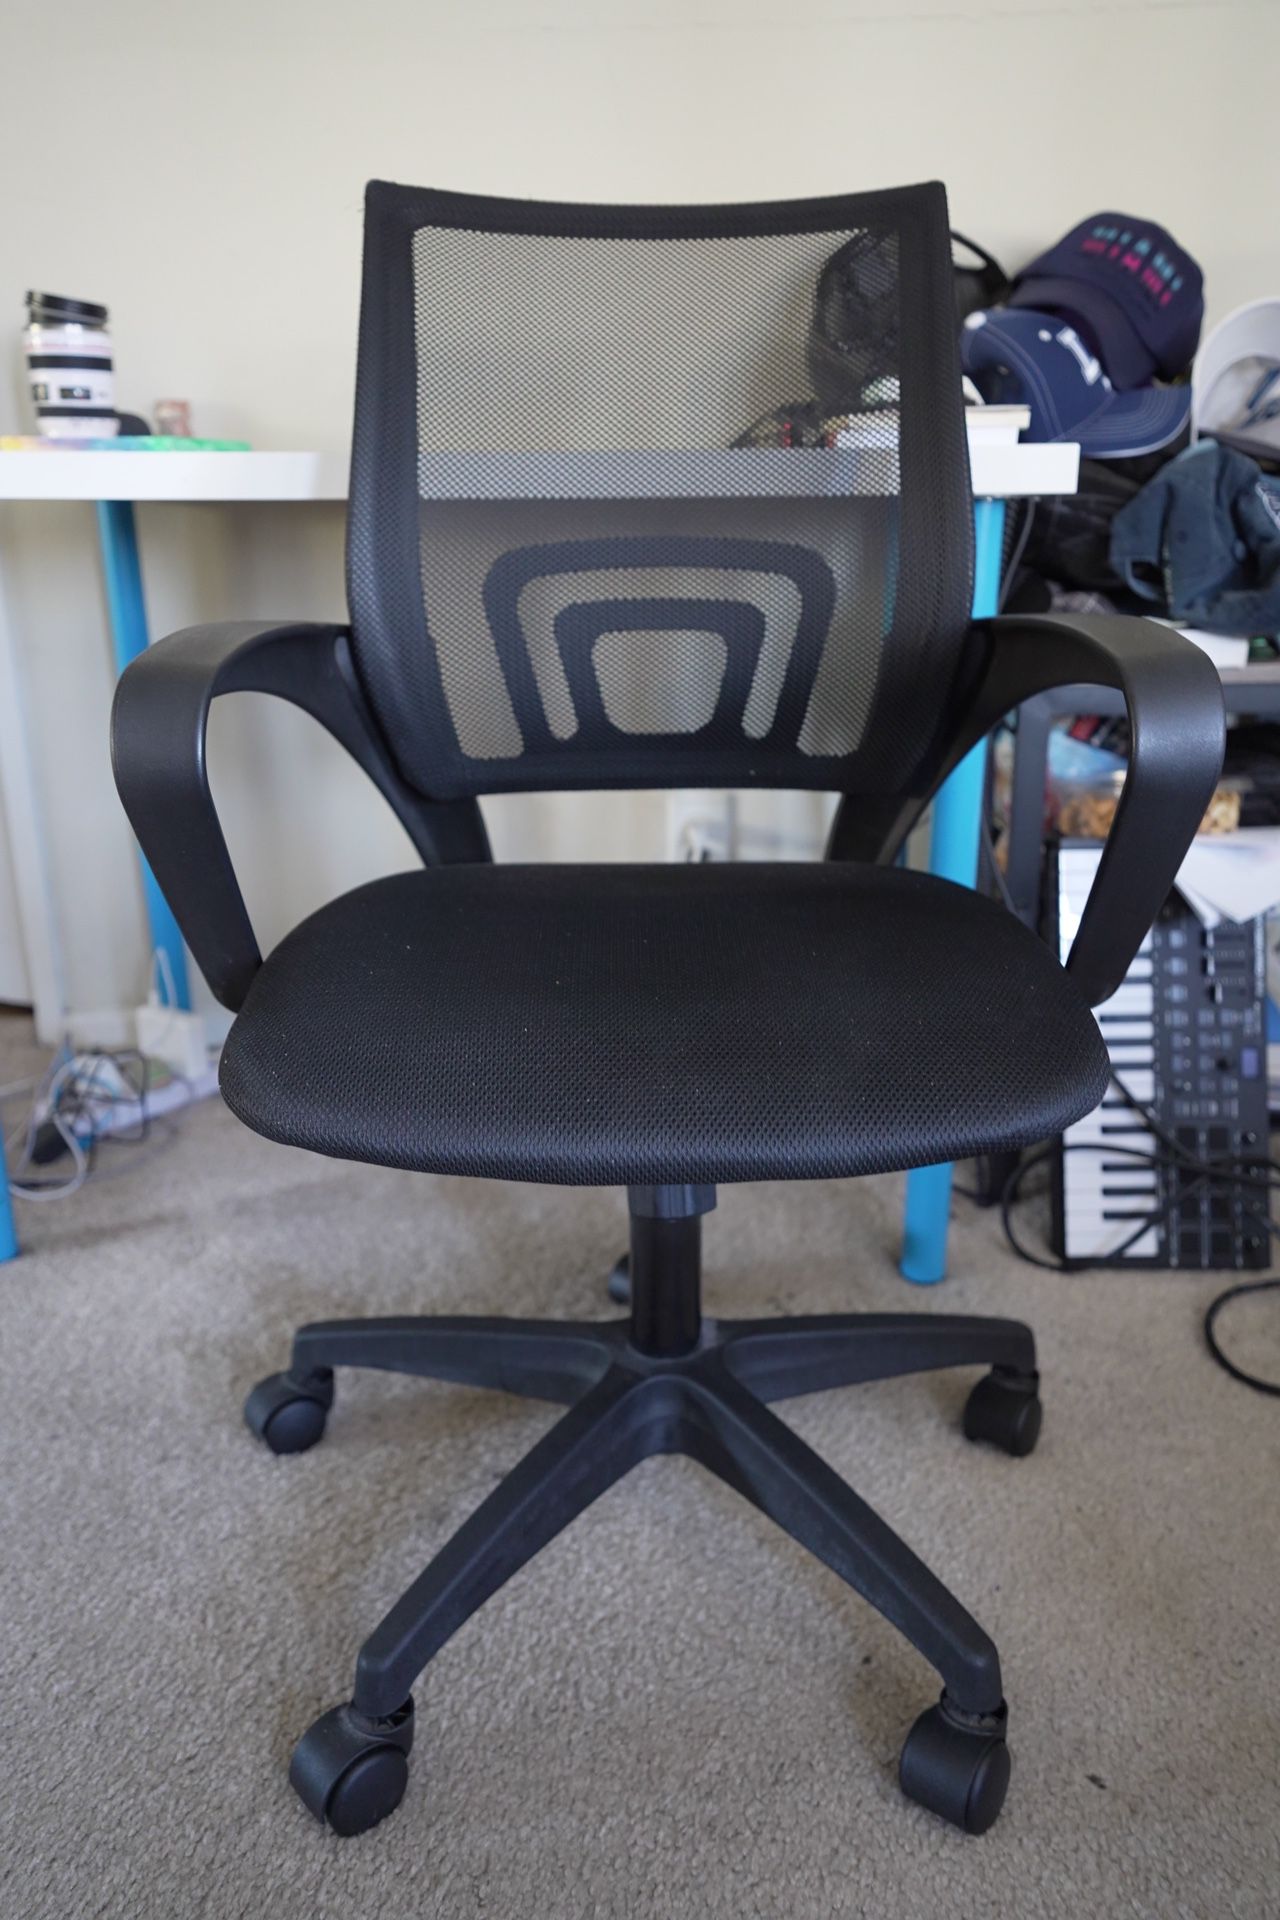 Home Office Ergonomic Desk Chair (Great Condition)